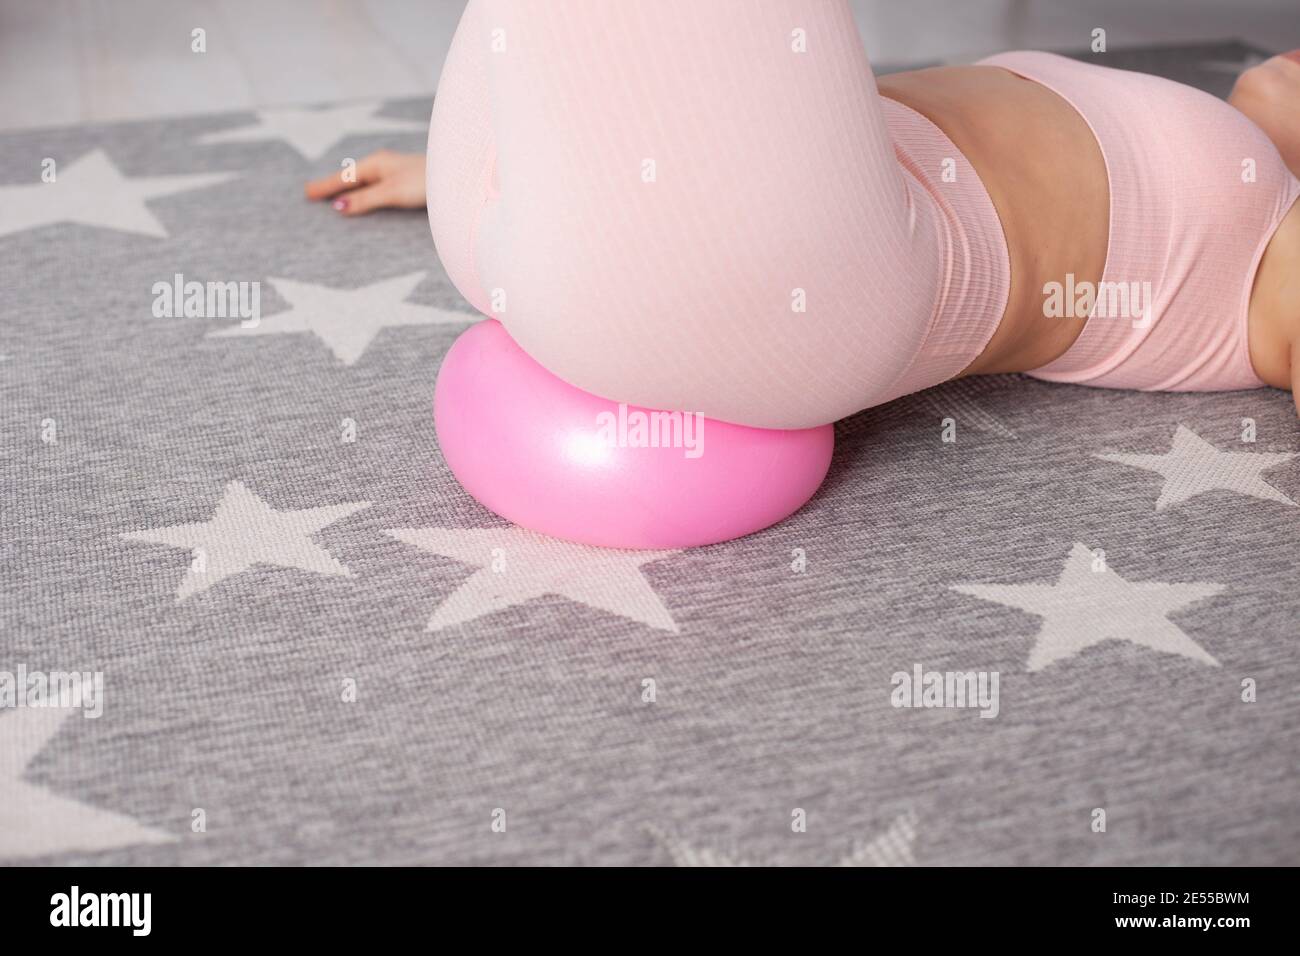 close-up woman sports booty in pink pants lying on a rubber flattened pilates ball on a gray carpet with white stars Stock Photo